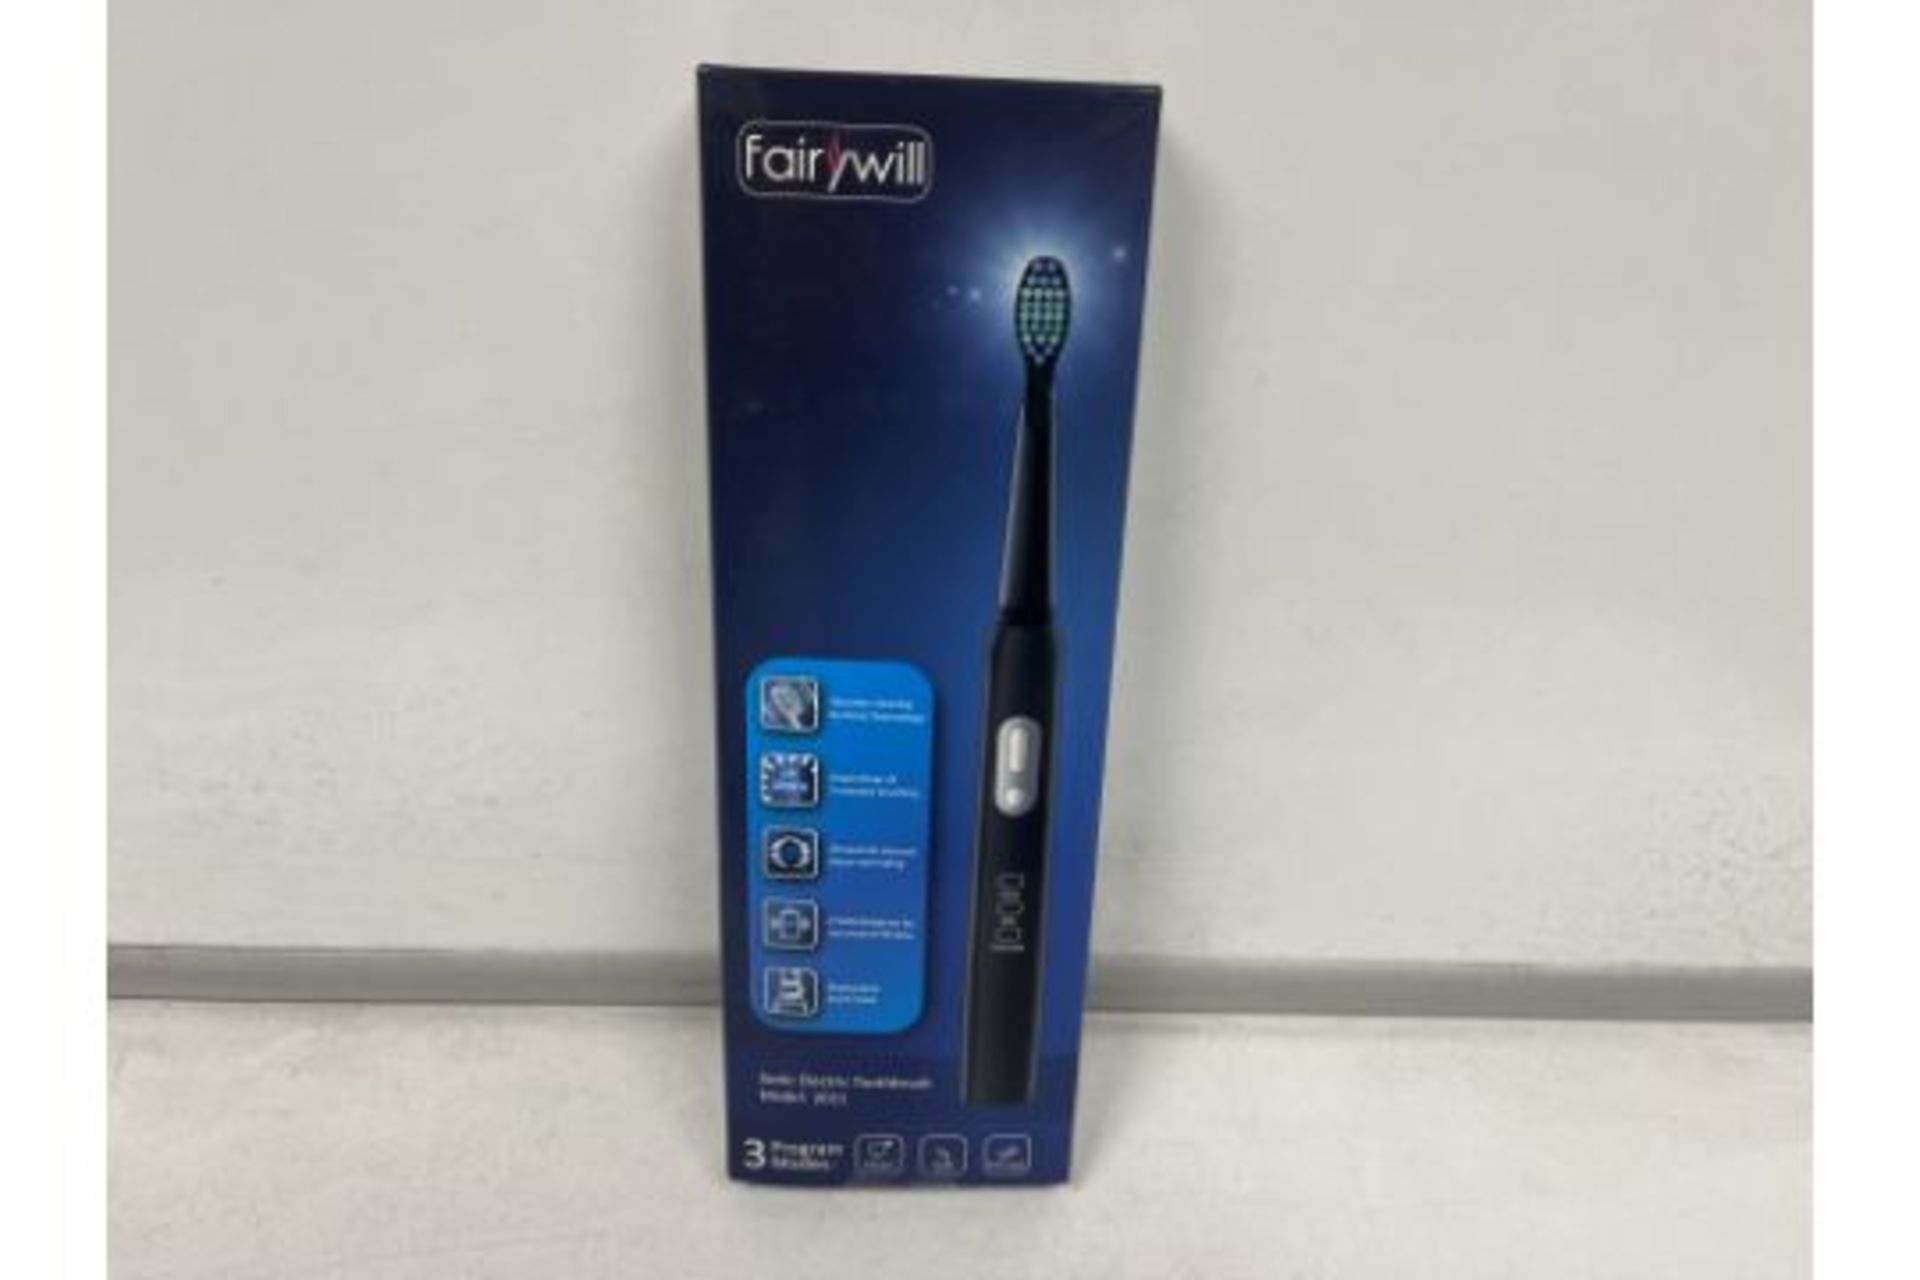 4 X BRAND NEW FAIRYWILL MODEL2011 SONIC ELECTRIC TOOTHBRUSH WITH REPLACEABLE BRUSH HEAD, 30 SECOND